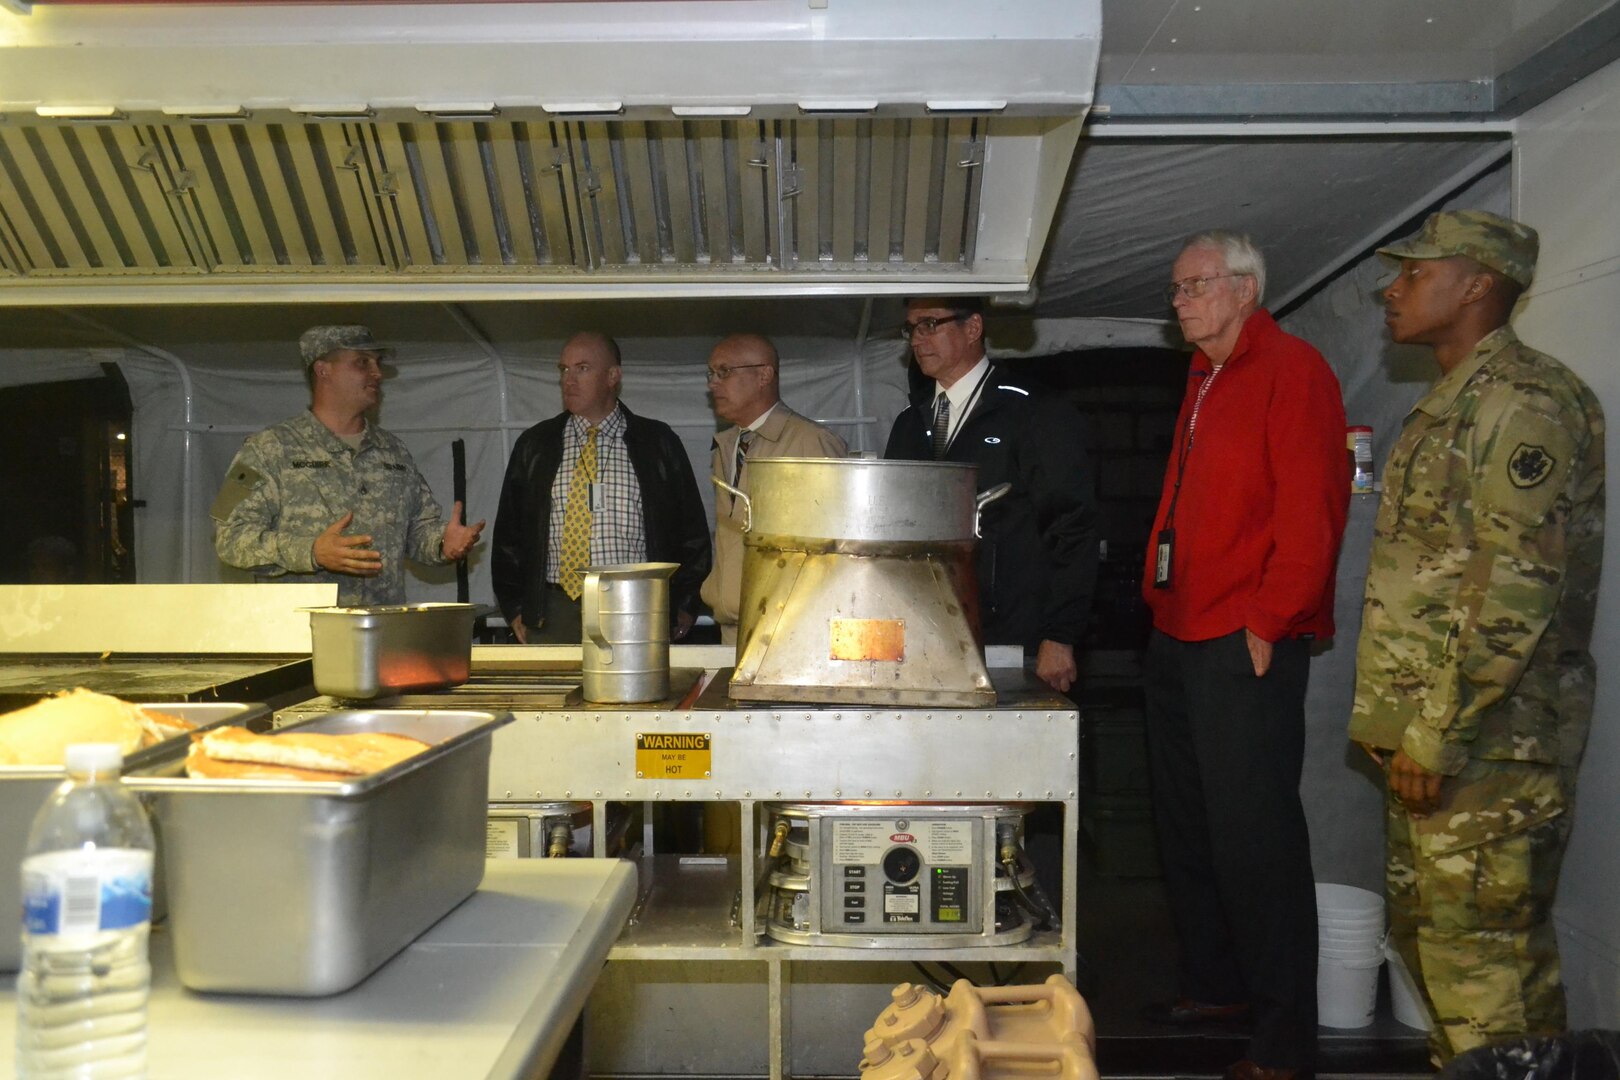 A group of Subsistence employees tour a field kitchen Sept. 24 that was set up by a Pennsylvania National Guard unit staged at NSA Philadelphia in support of the Papal visit and World Meeting of Families.